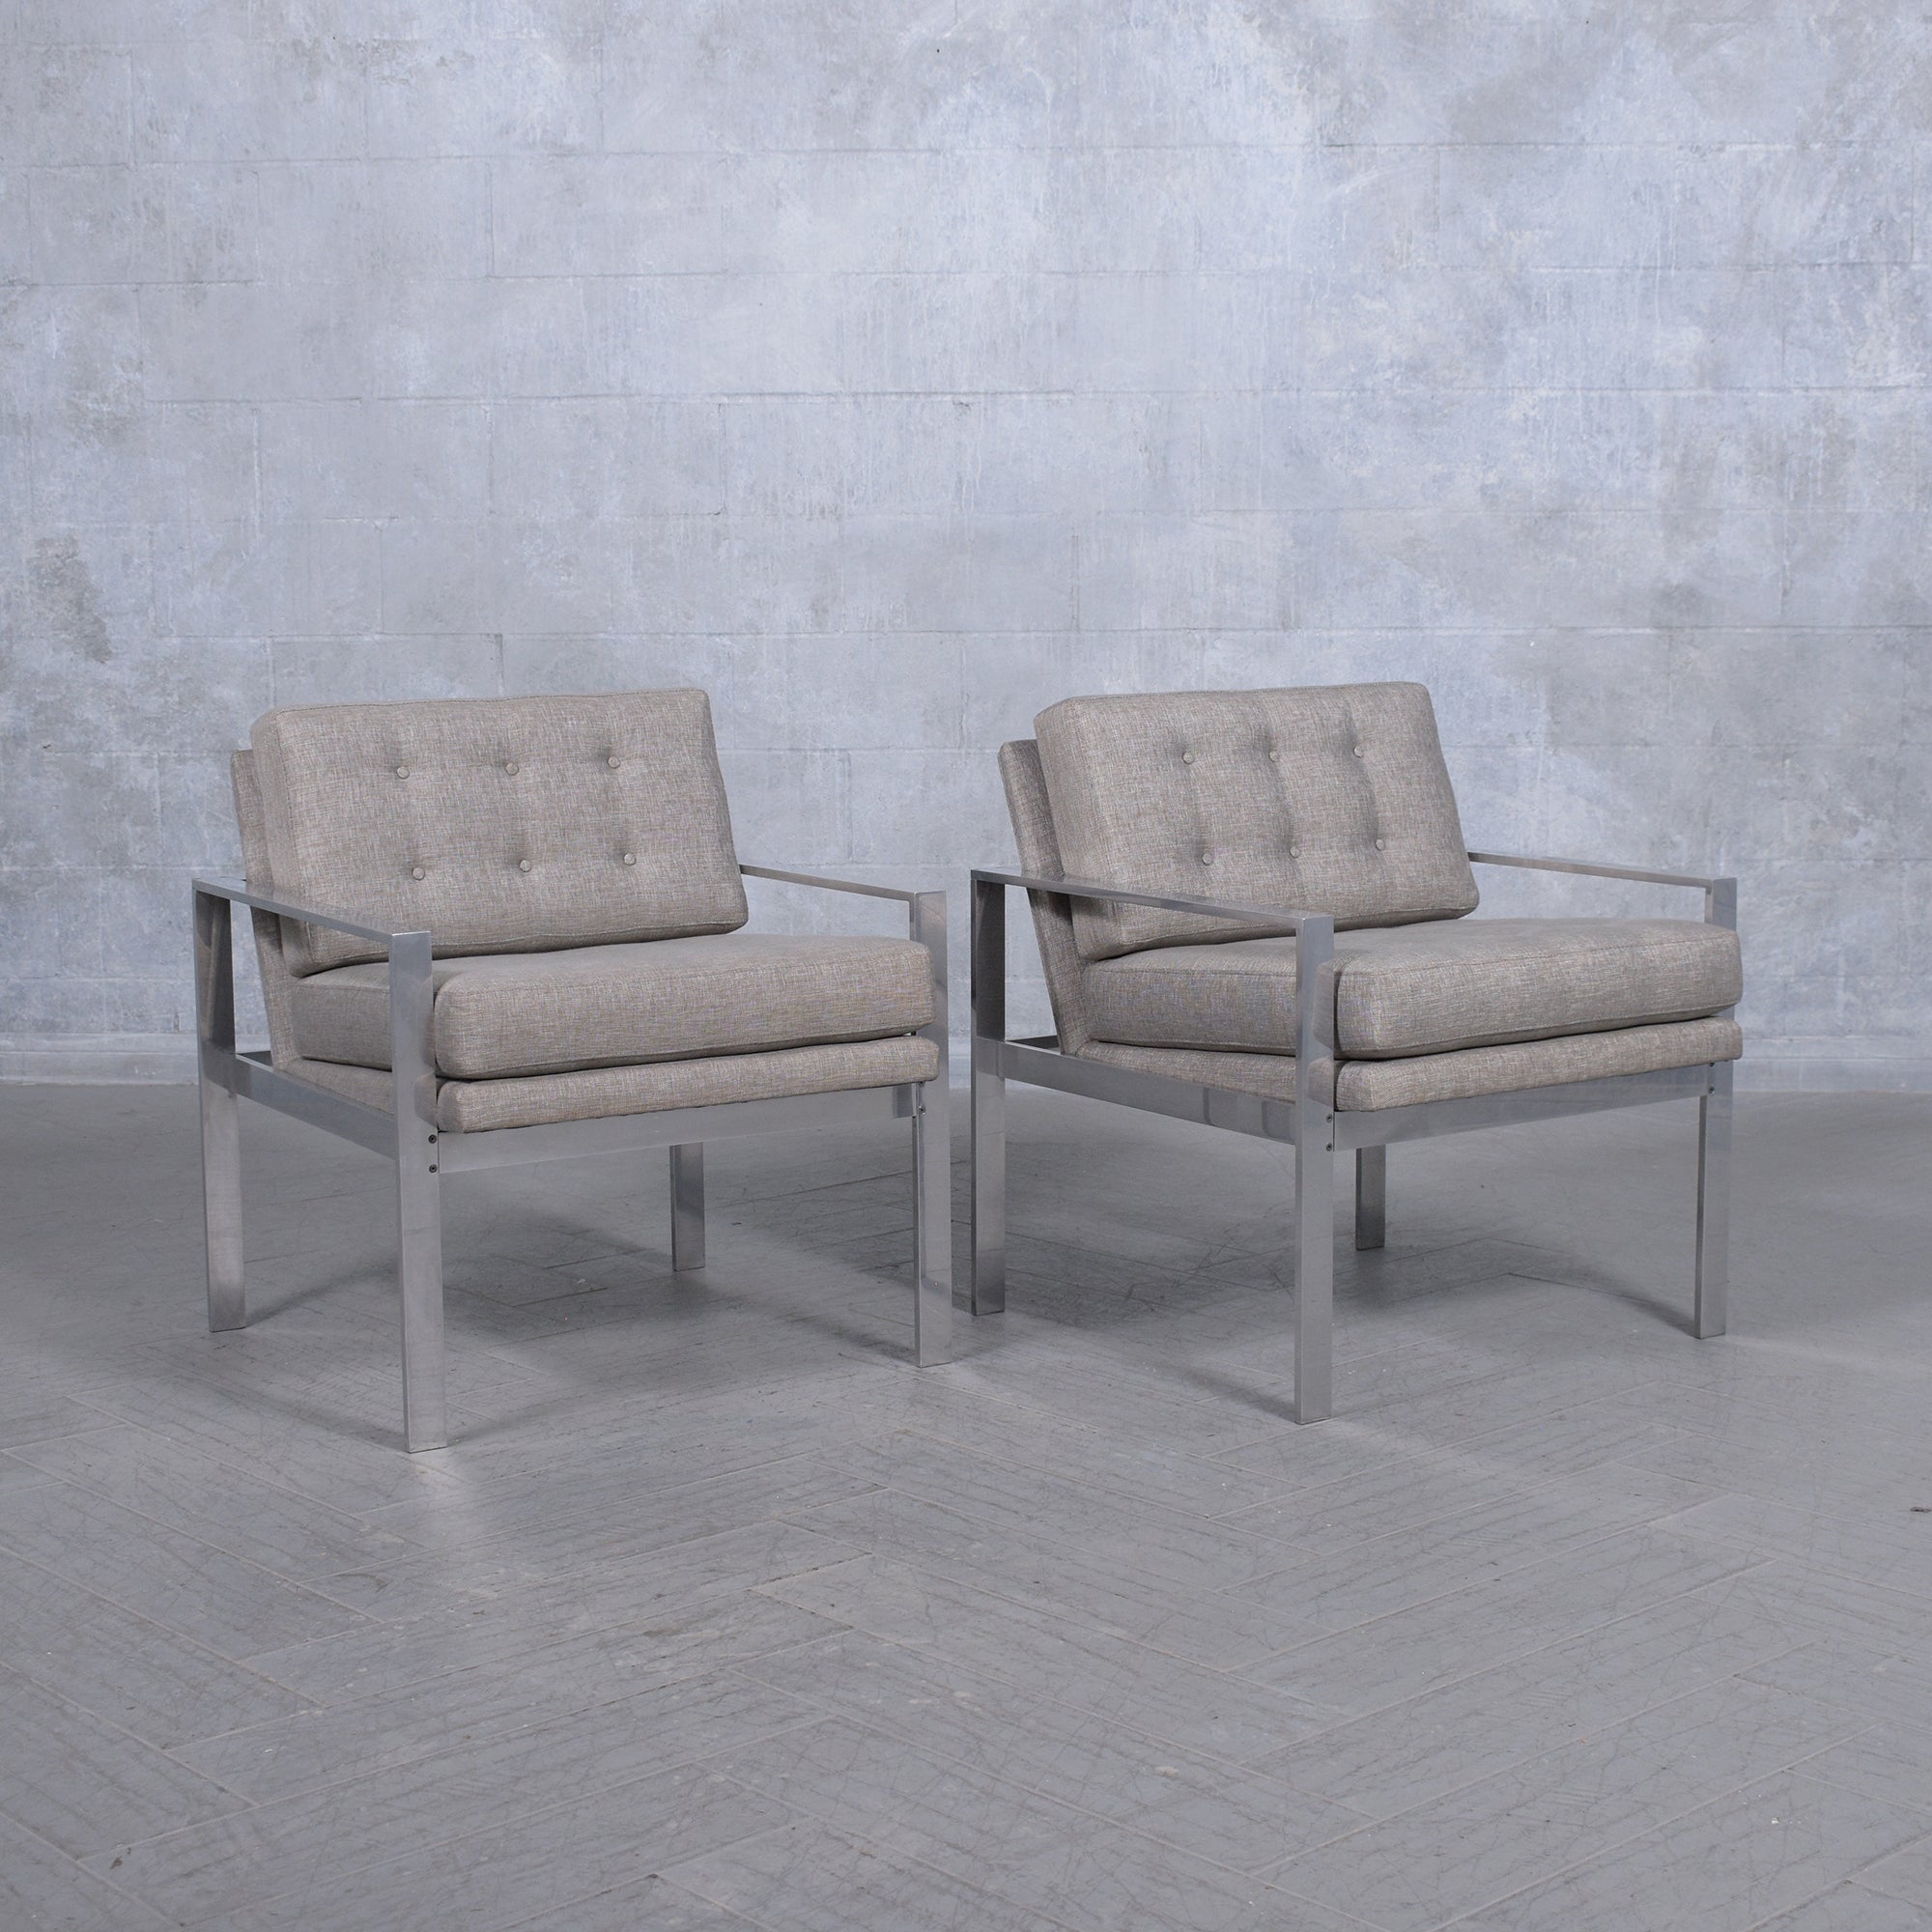 Dive into the timeless elegance of mid-century modern design with our meticulously restored pair of Milo Baughman lounge chairs. Celebrated for their classic style and unmatched comfort, these iconic pieces have been rejuvenated by our expert